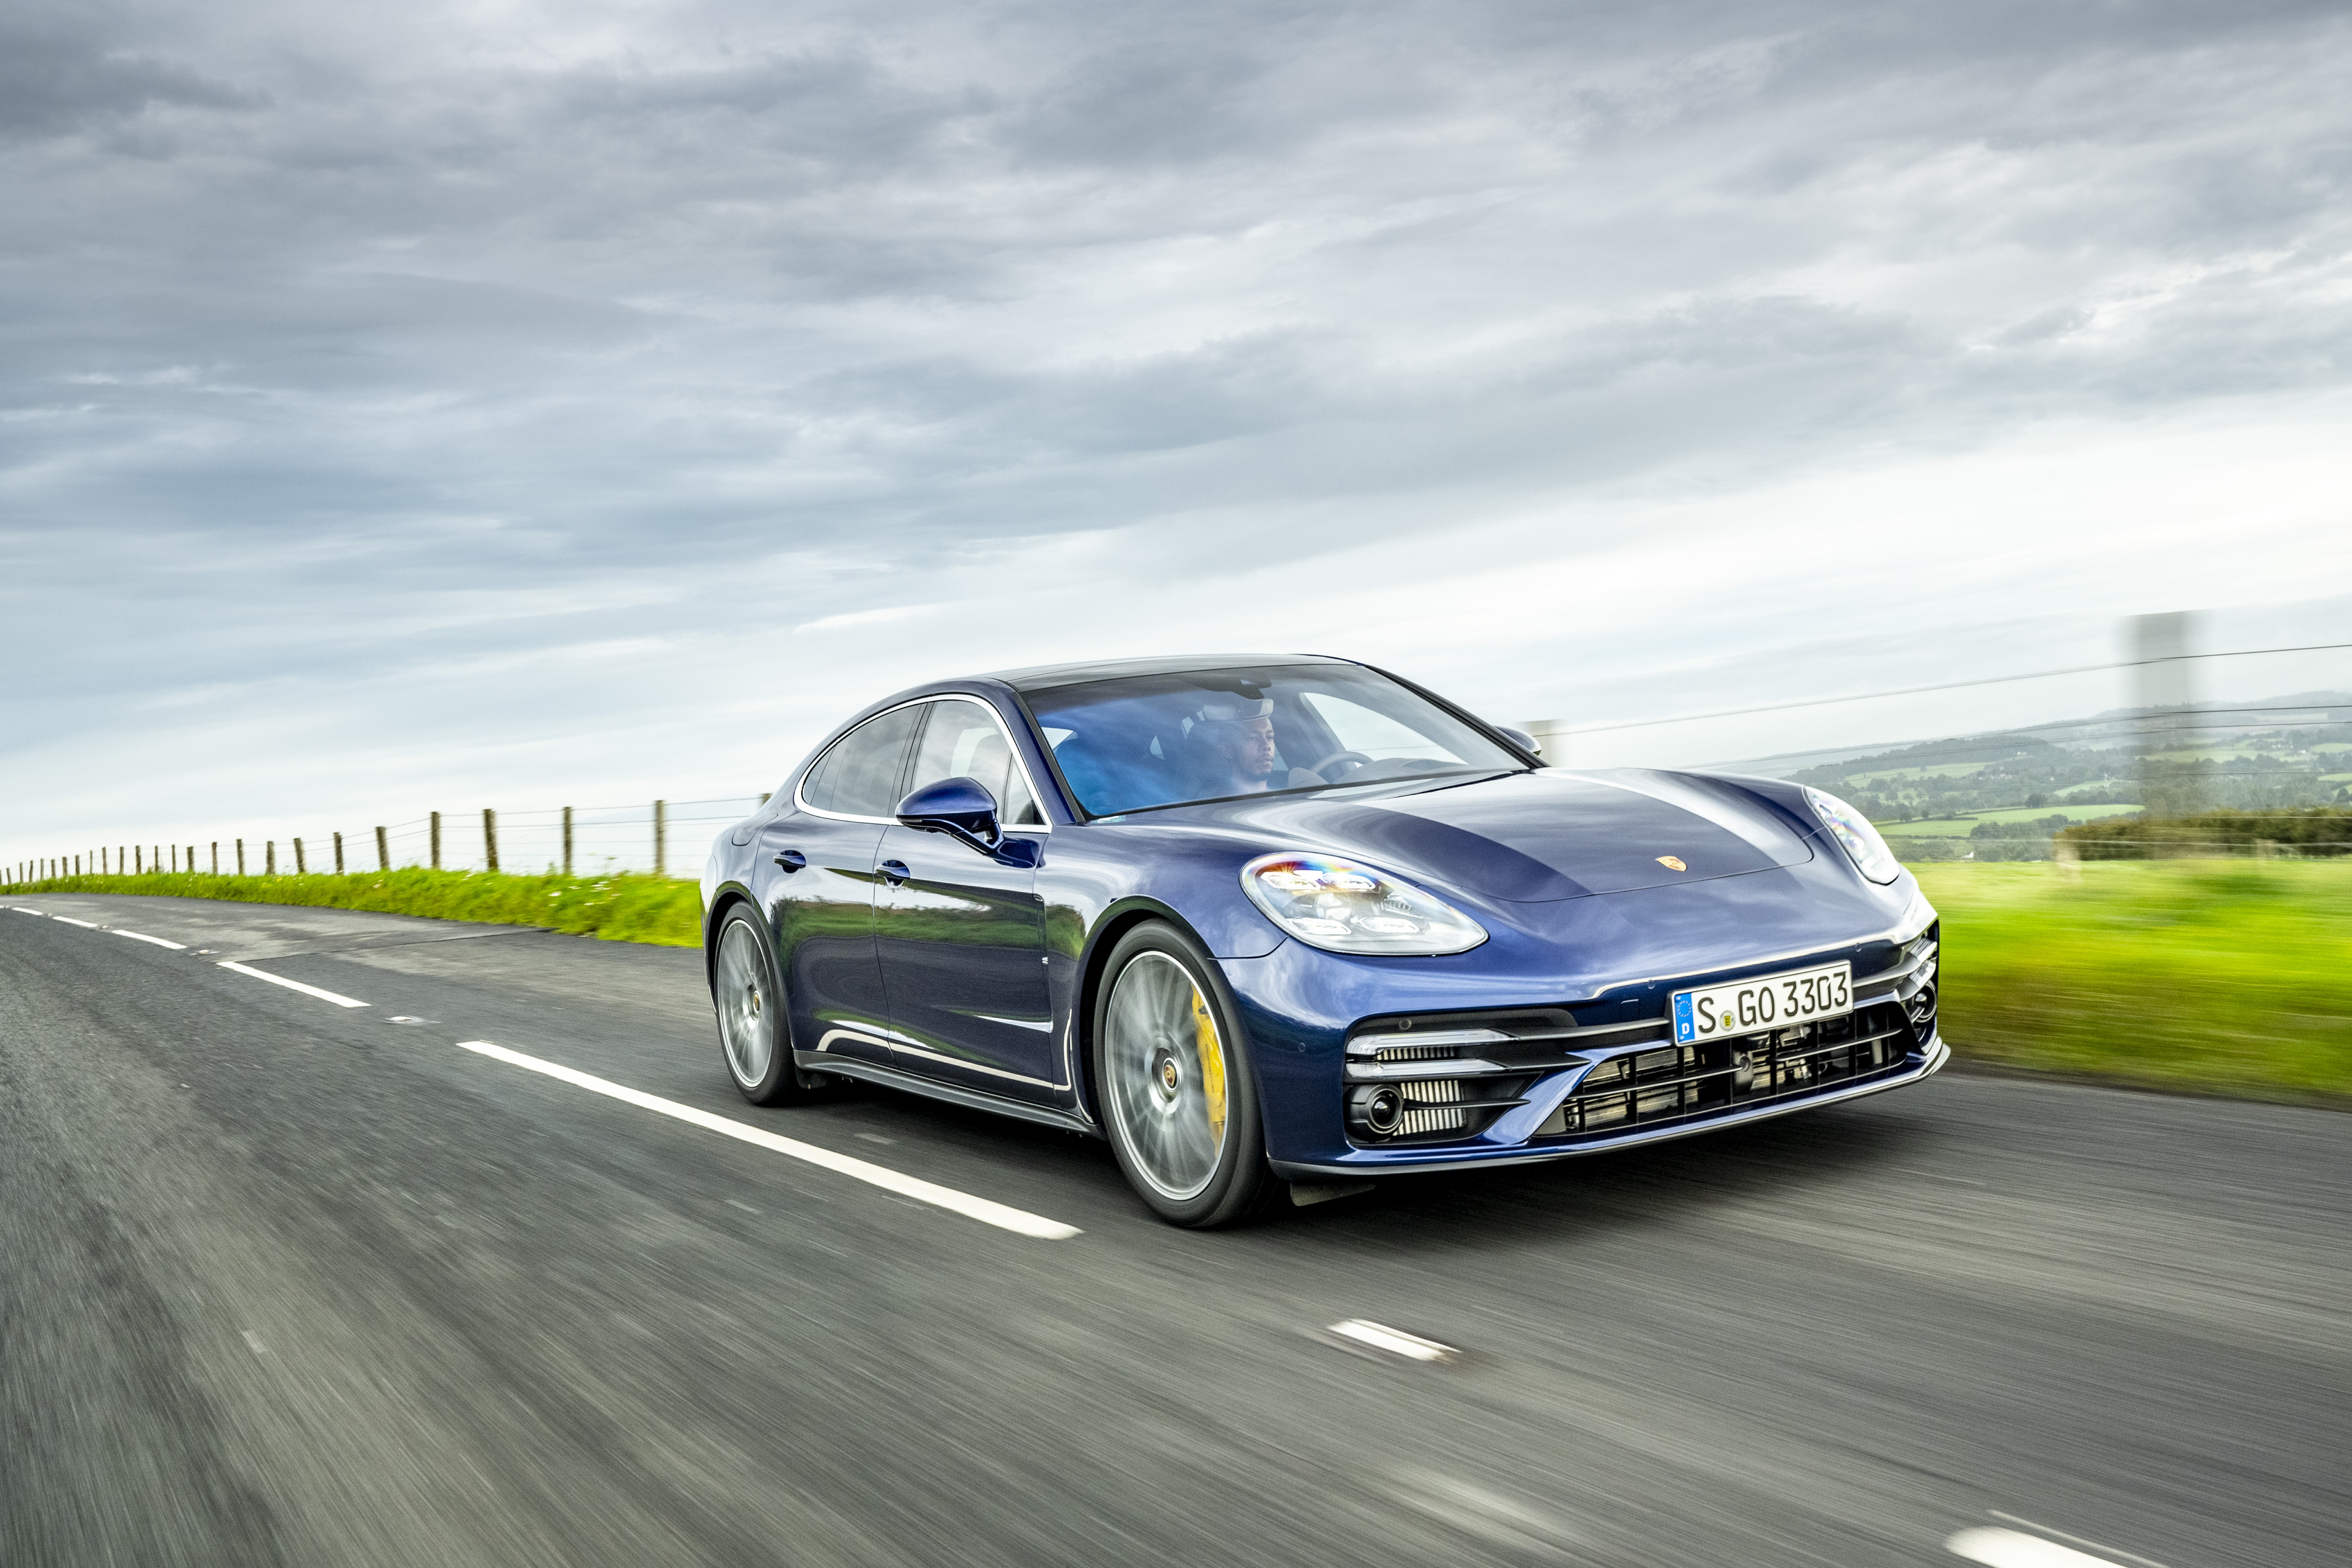 Blue Porsche Panamera Turbo S driving on a rural road